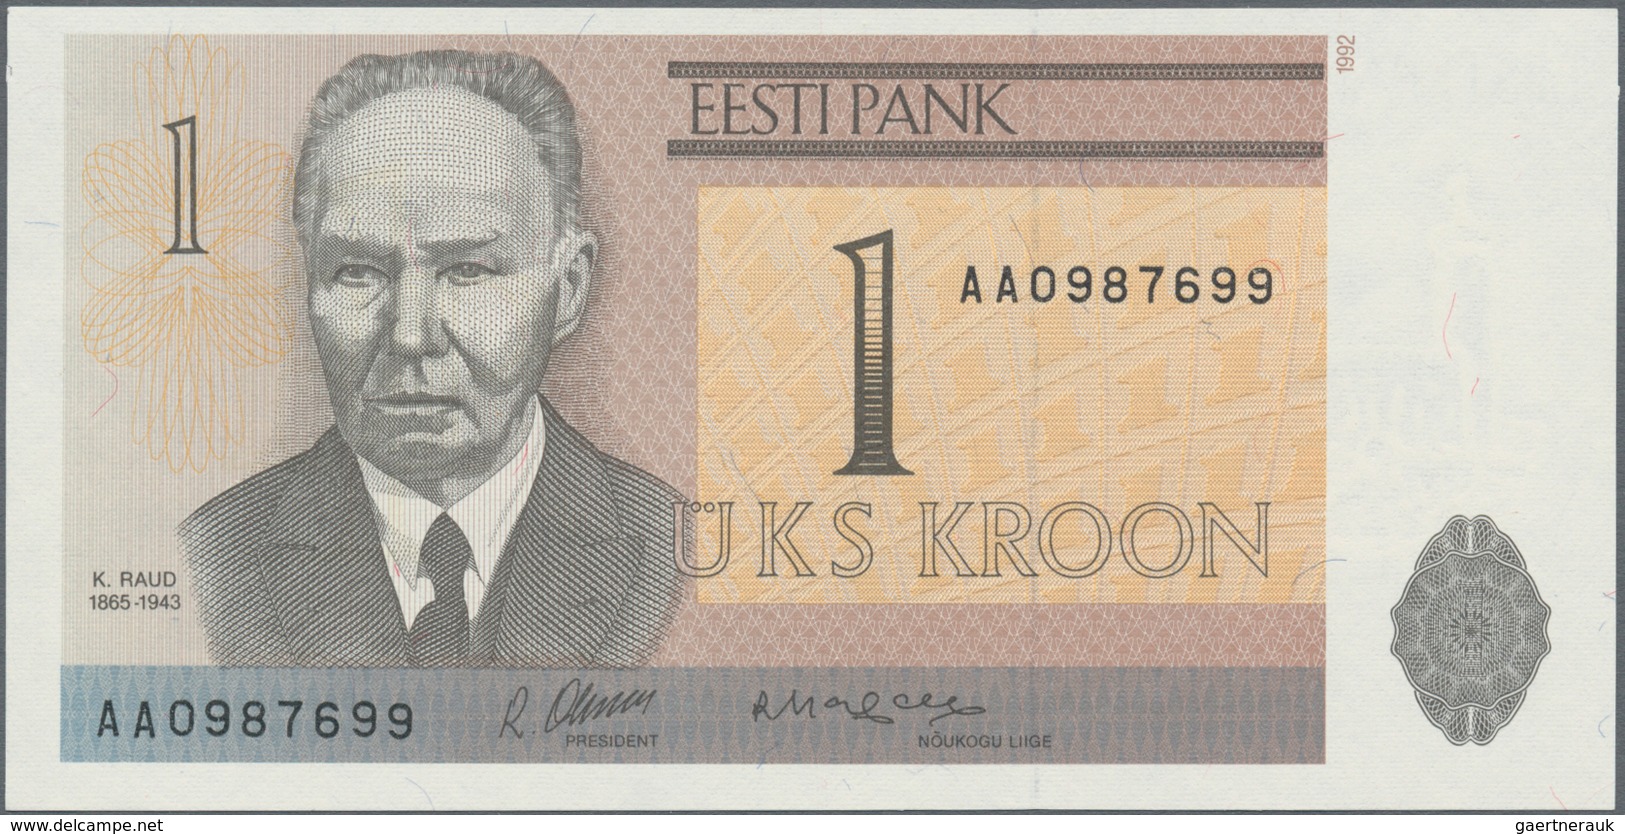 Estonia / Estland: Very nice set with 11 Banknotes series 1991 and 1992 with 5, 10, 25, 100 and 500